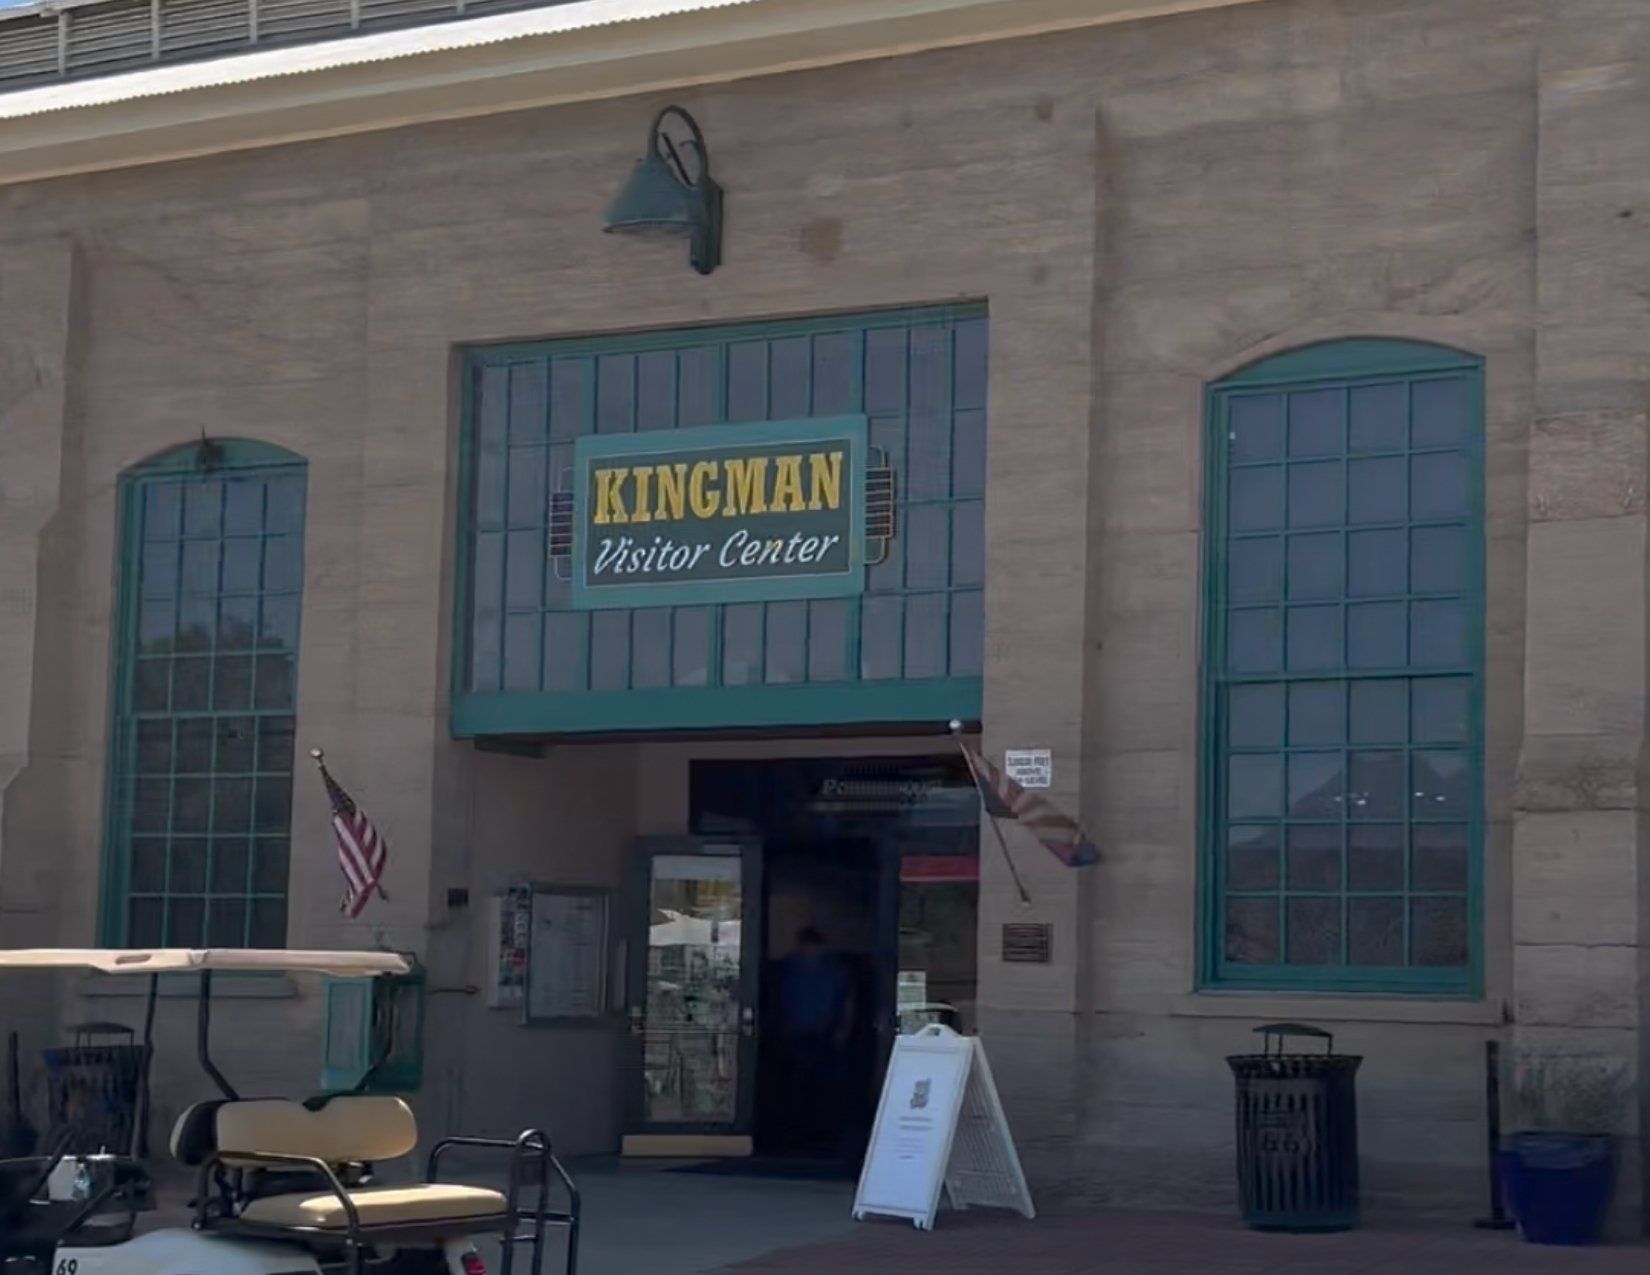 Large Building with Kingman Visitor Center sign